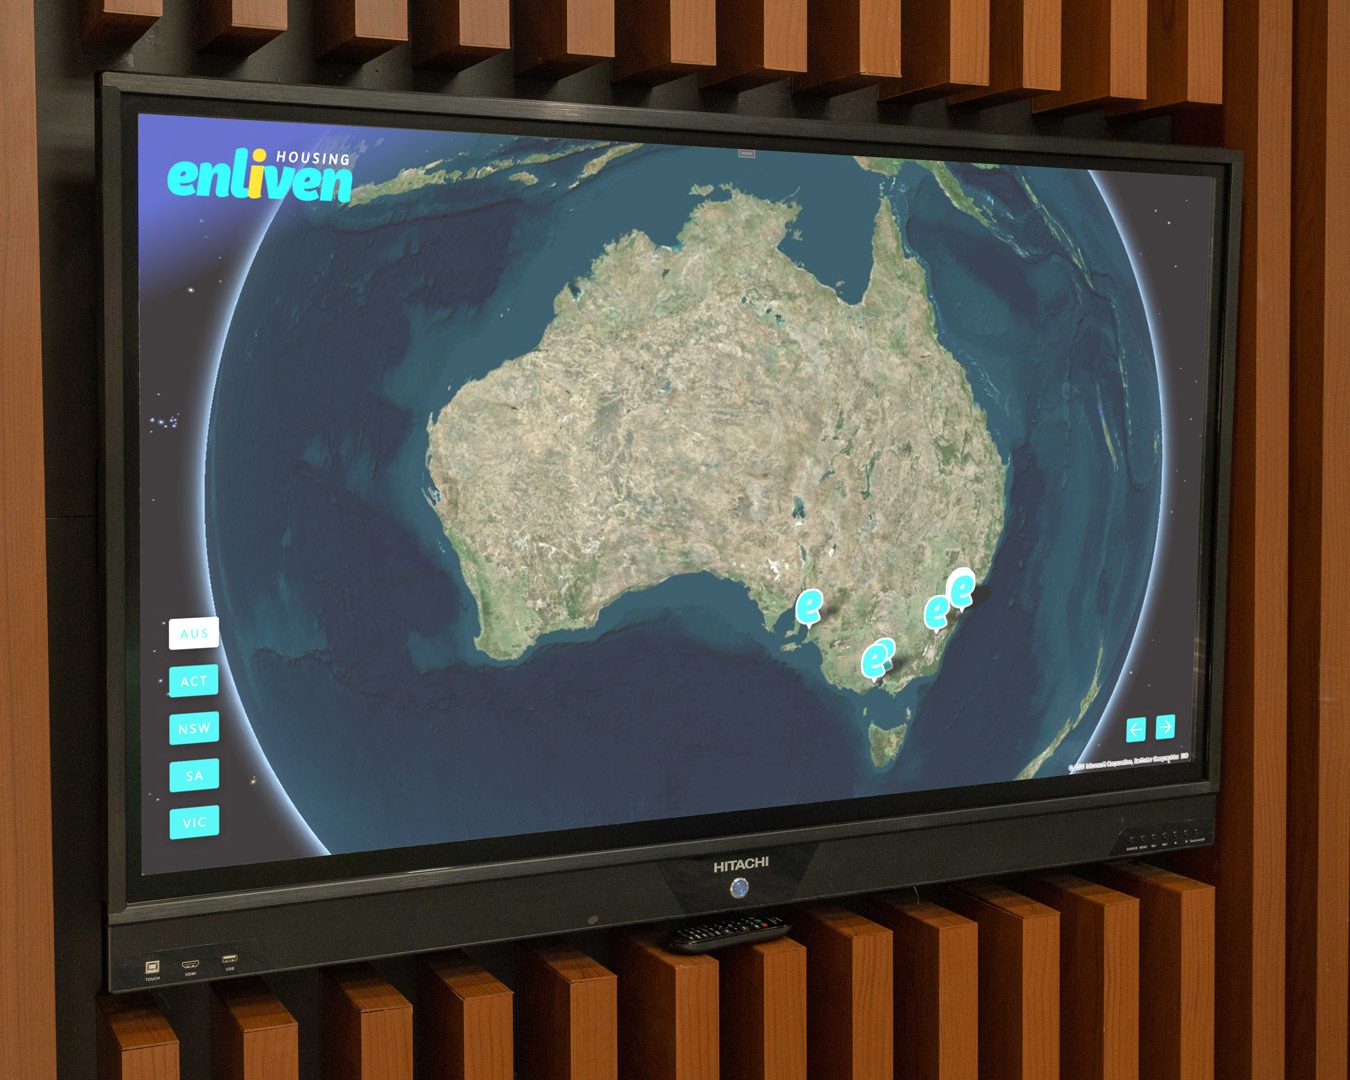 The software’s main screen, showing all the locations on a map. The software animates between locations in a loop.